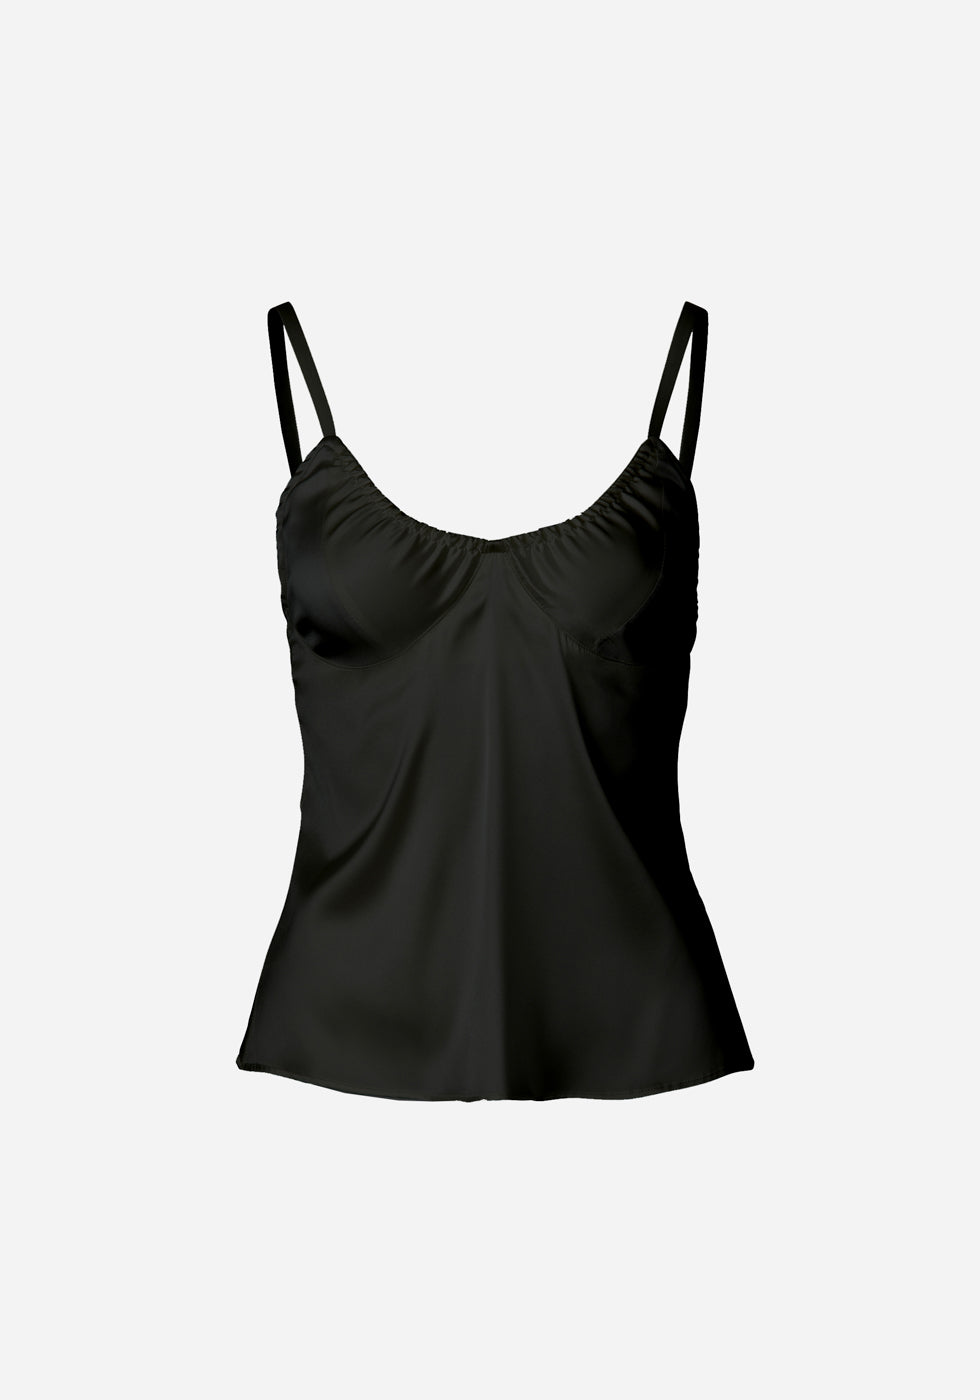 Silk Satin Camisole Black｜Buy Now and Enjoy Discount Offers